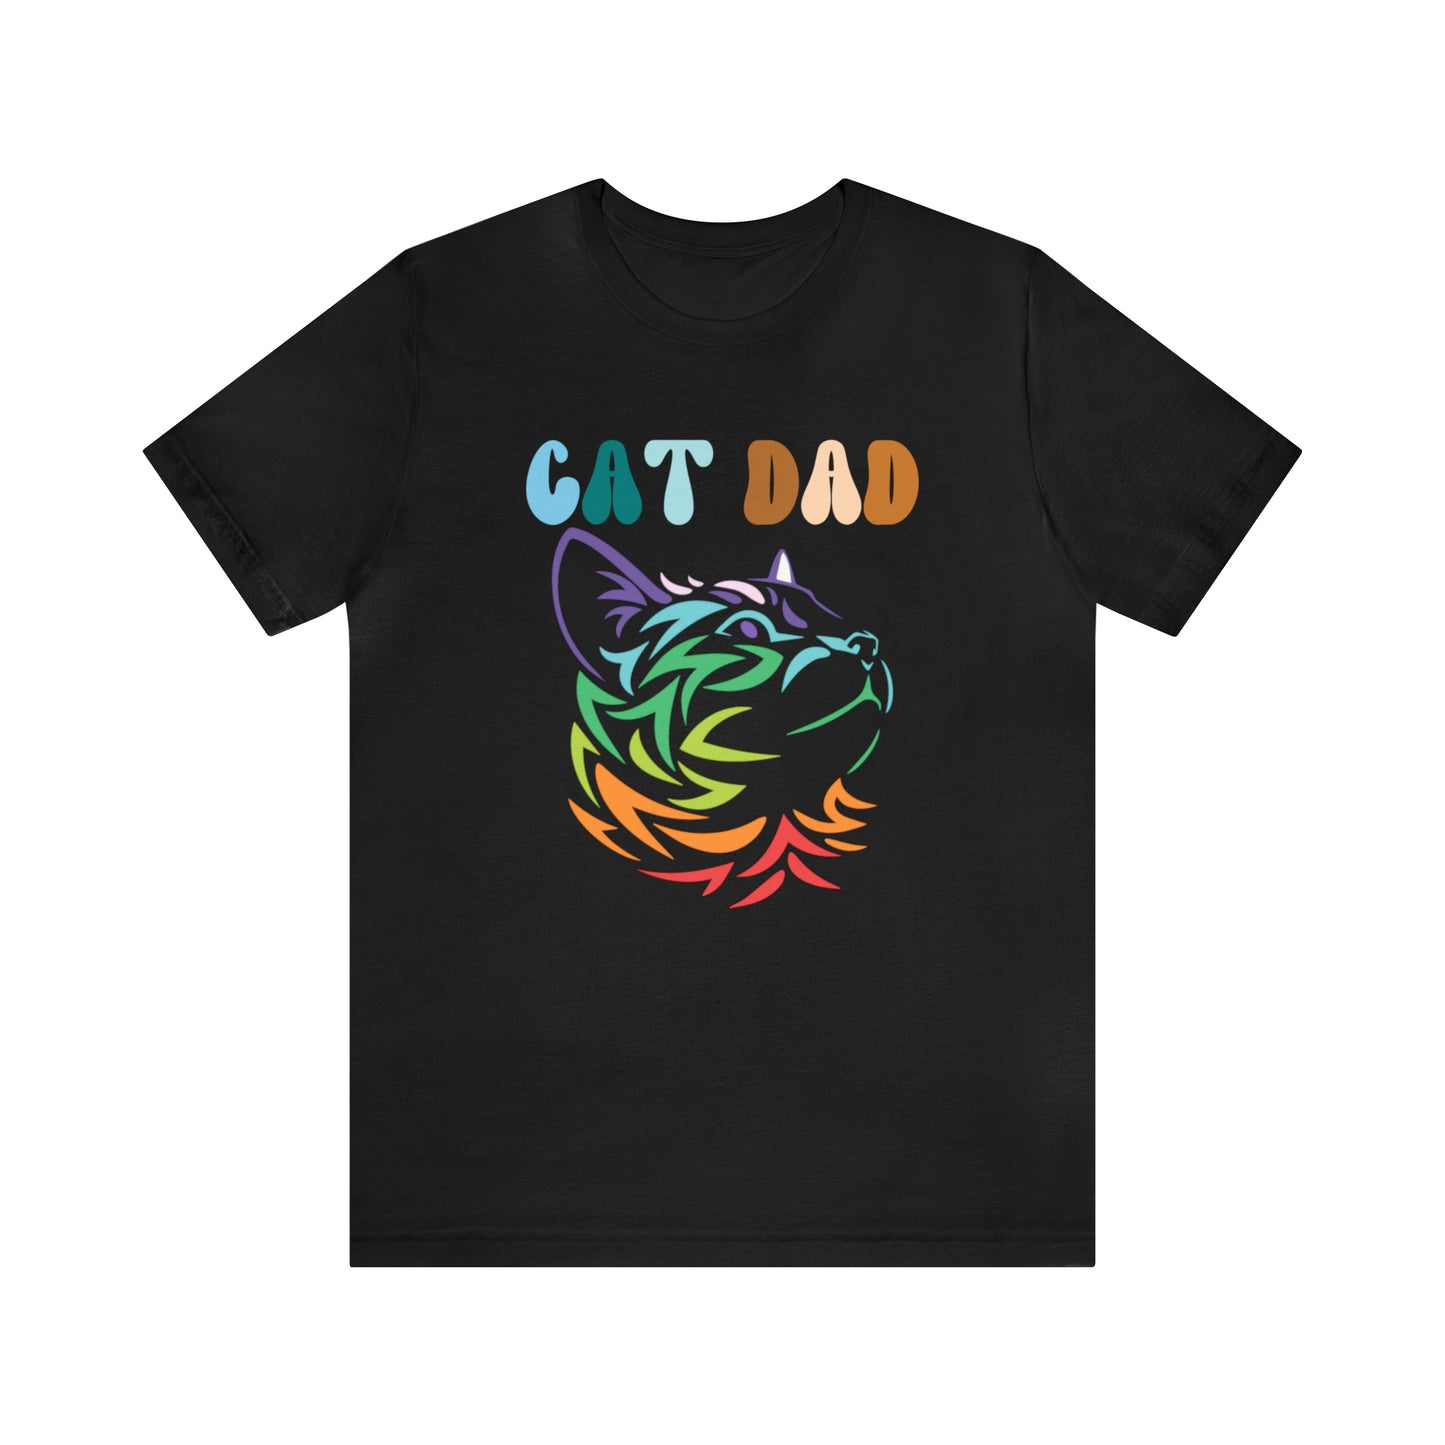 Cat Daddy Shirt, Cat Dad T-Shirt, Funny Cat Tee, Cat Father, Gift from the Cat, Cat Dad Gift, Cat Lover Shirt, T247